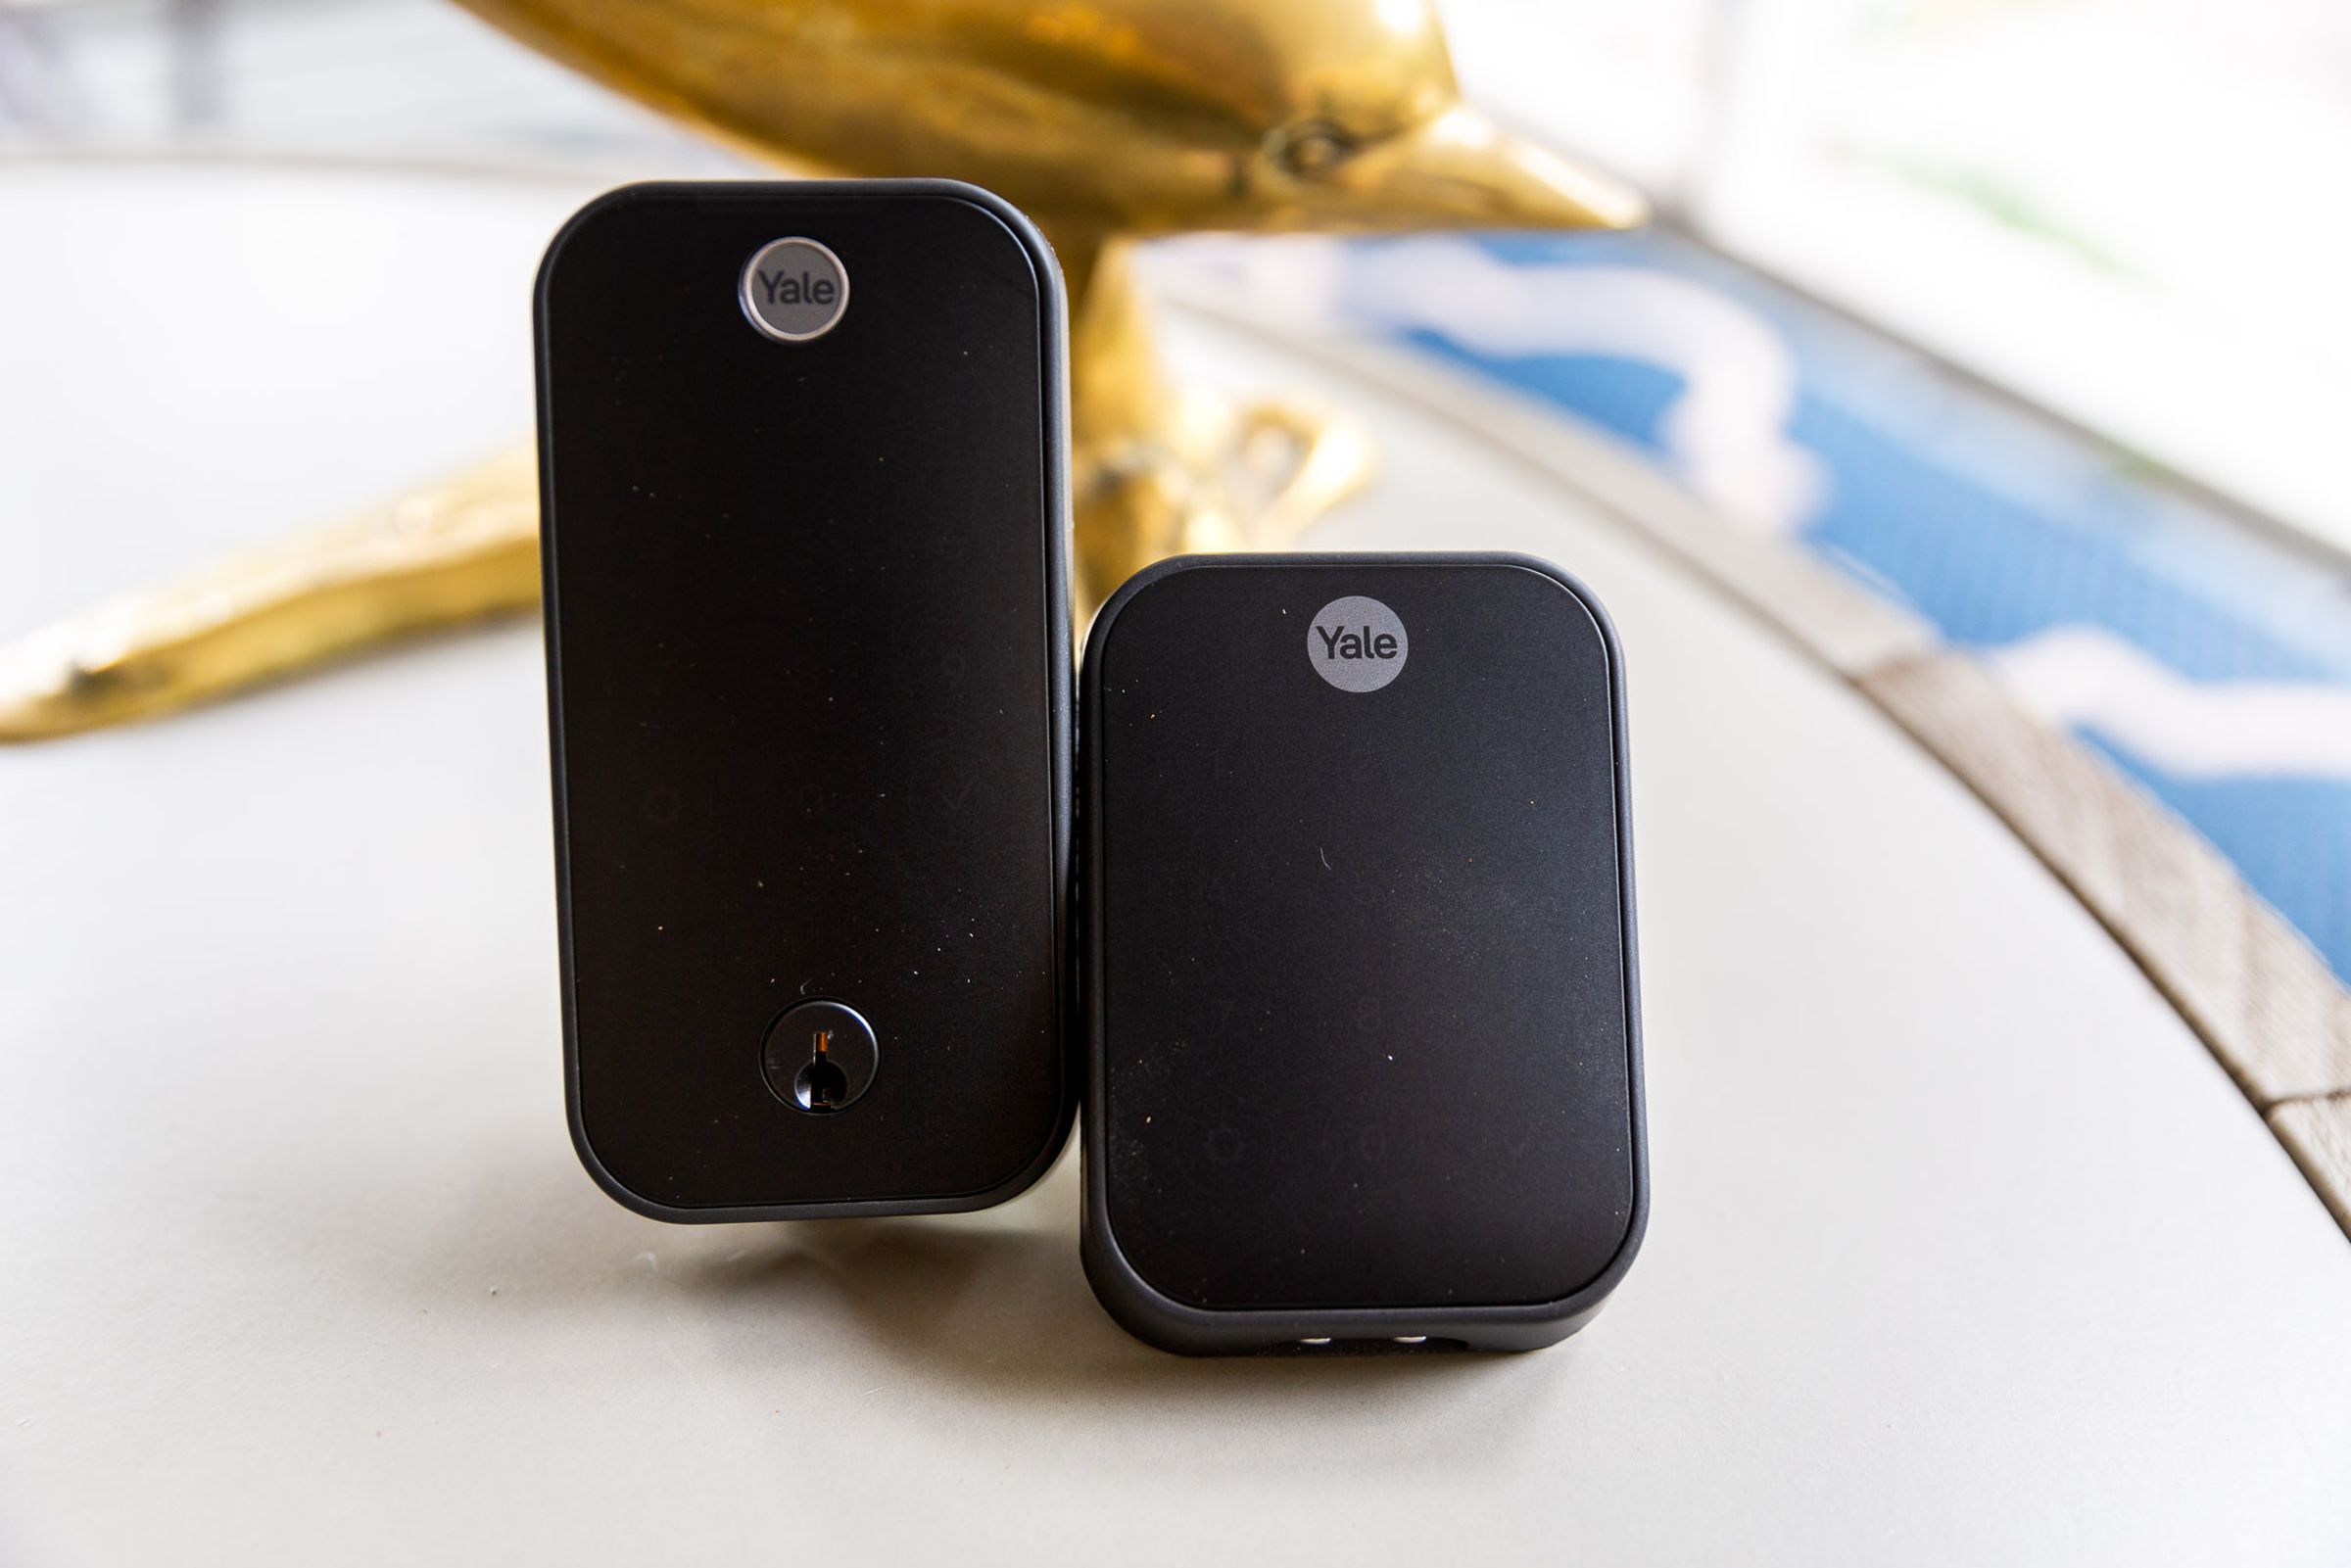 The Yale Assure 2 Touch and Yale Assure 2 Plus smart locks.